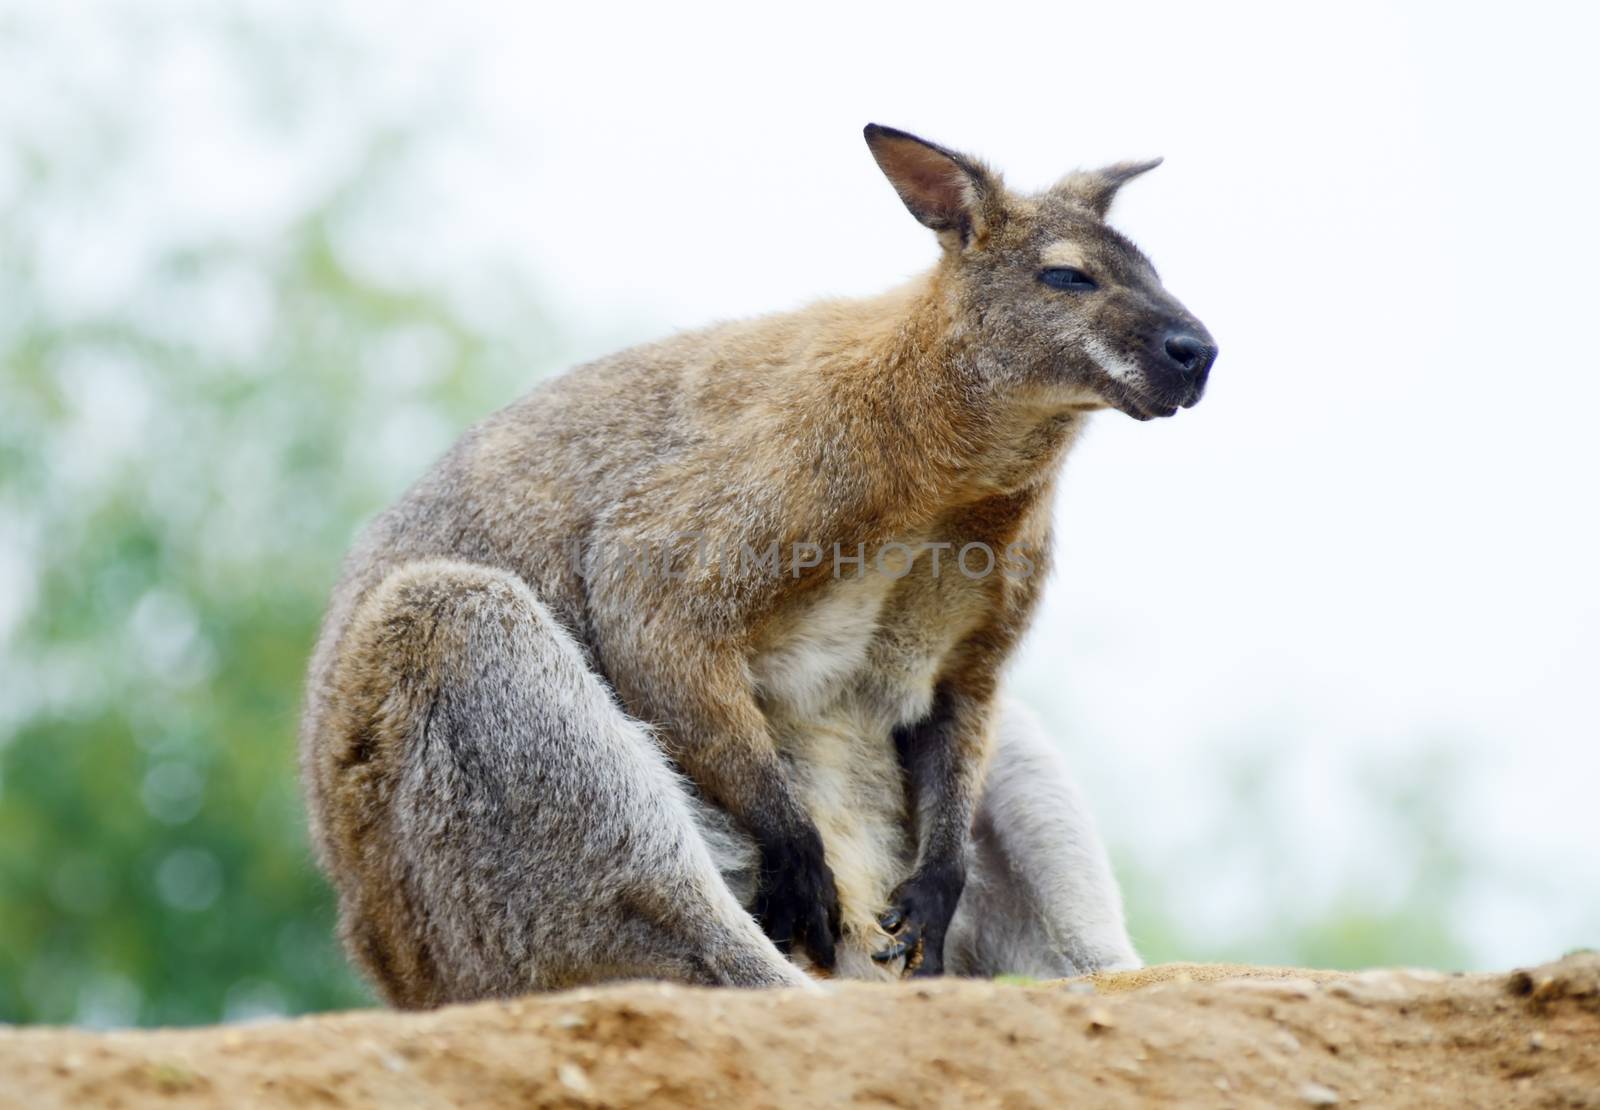 One wallaby alone sitting and resting looking sleepy